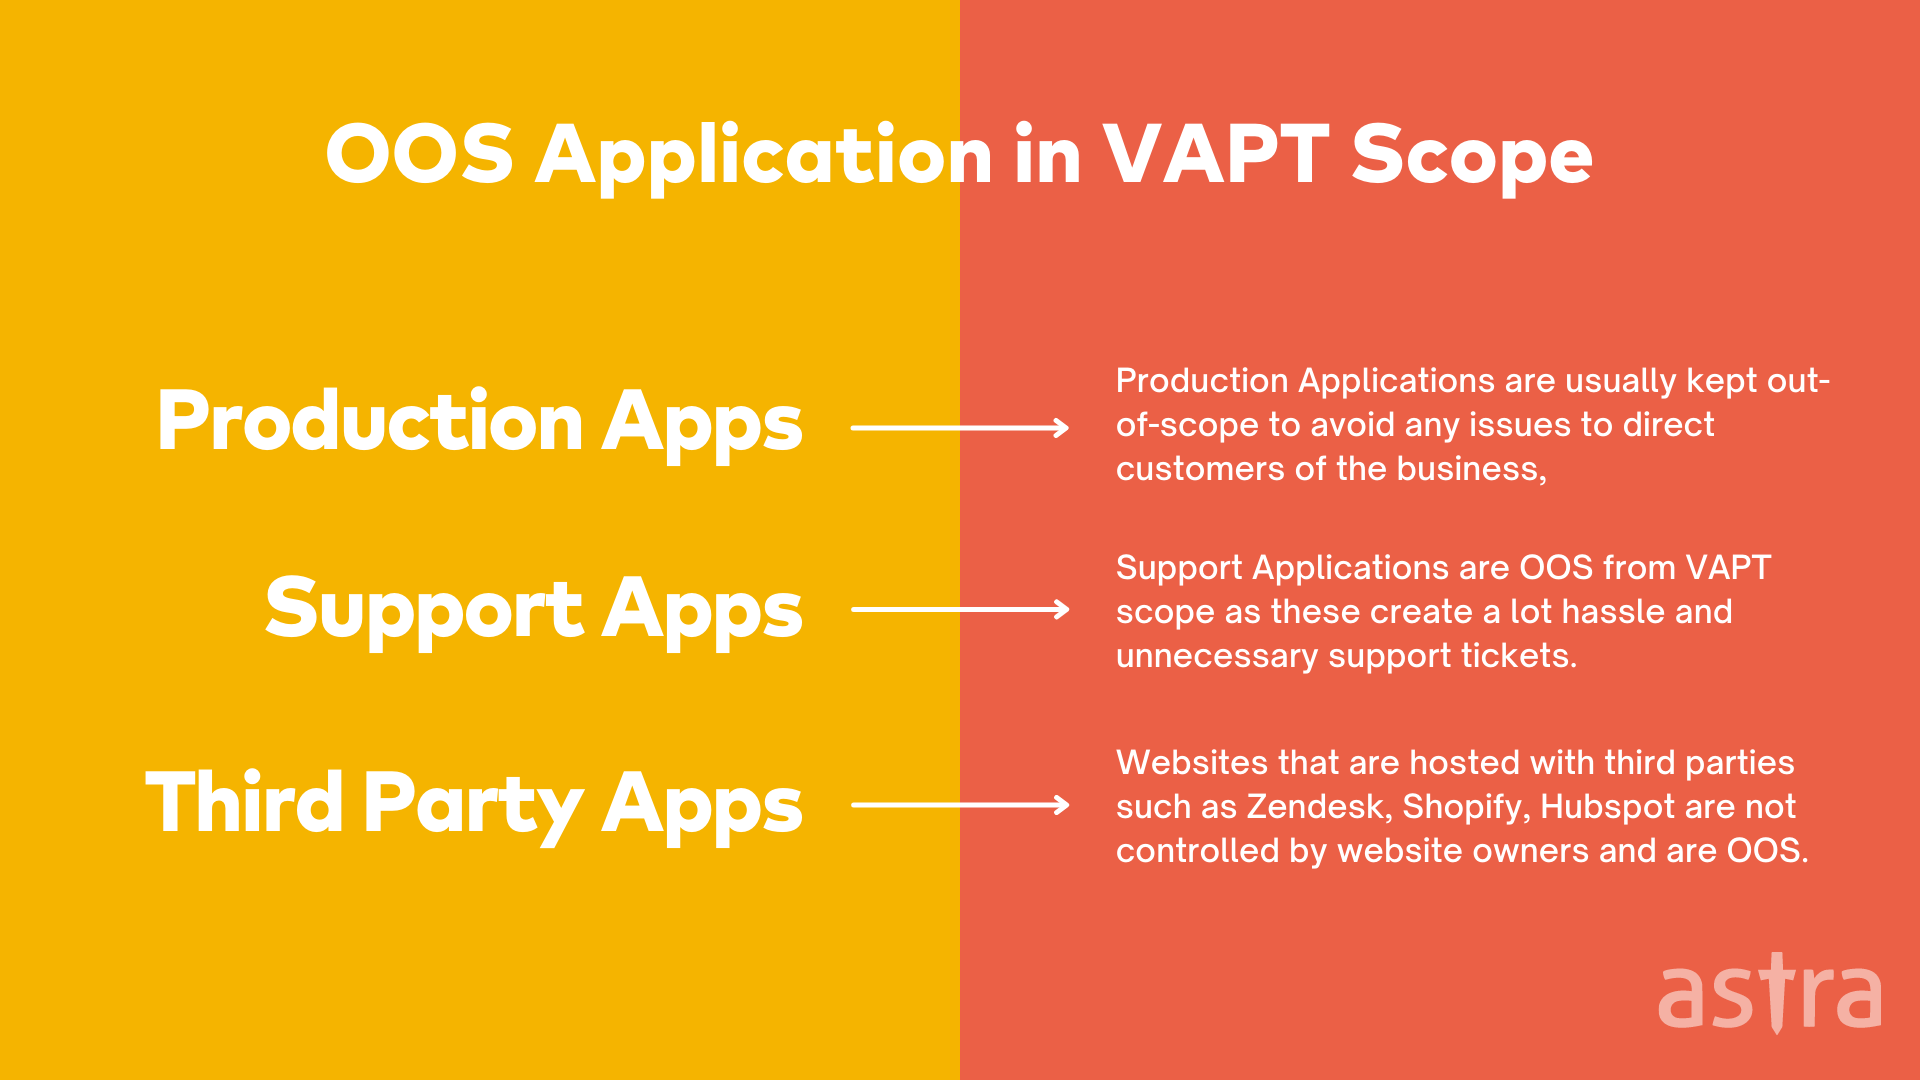 Out-of-Scope Application in VAPT Scope